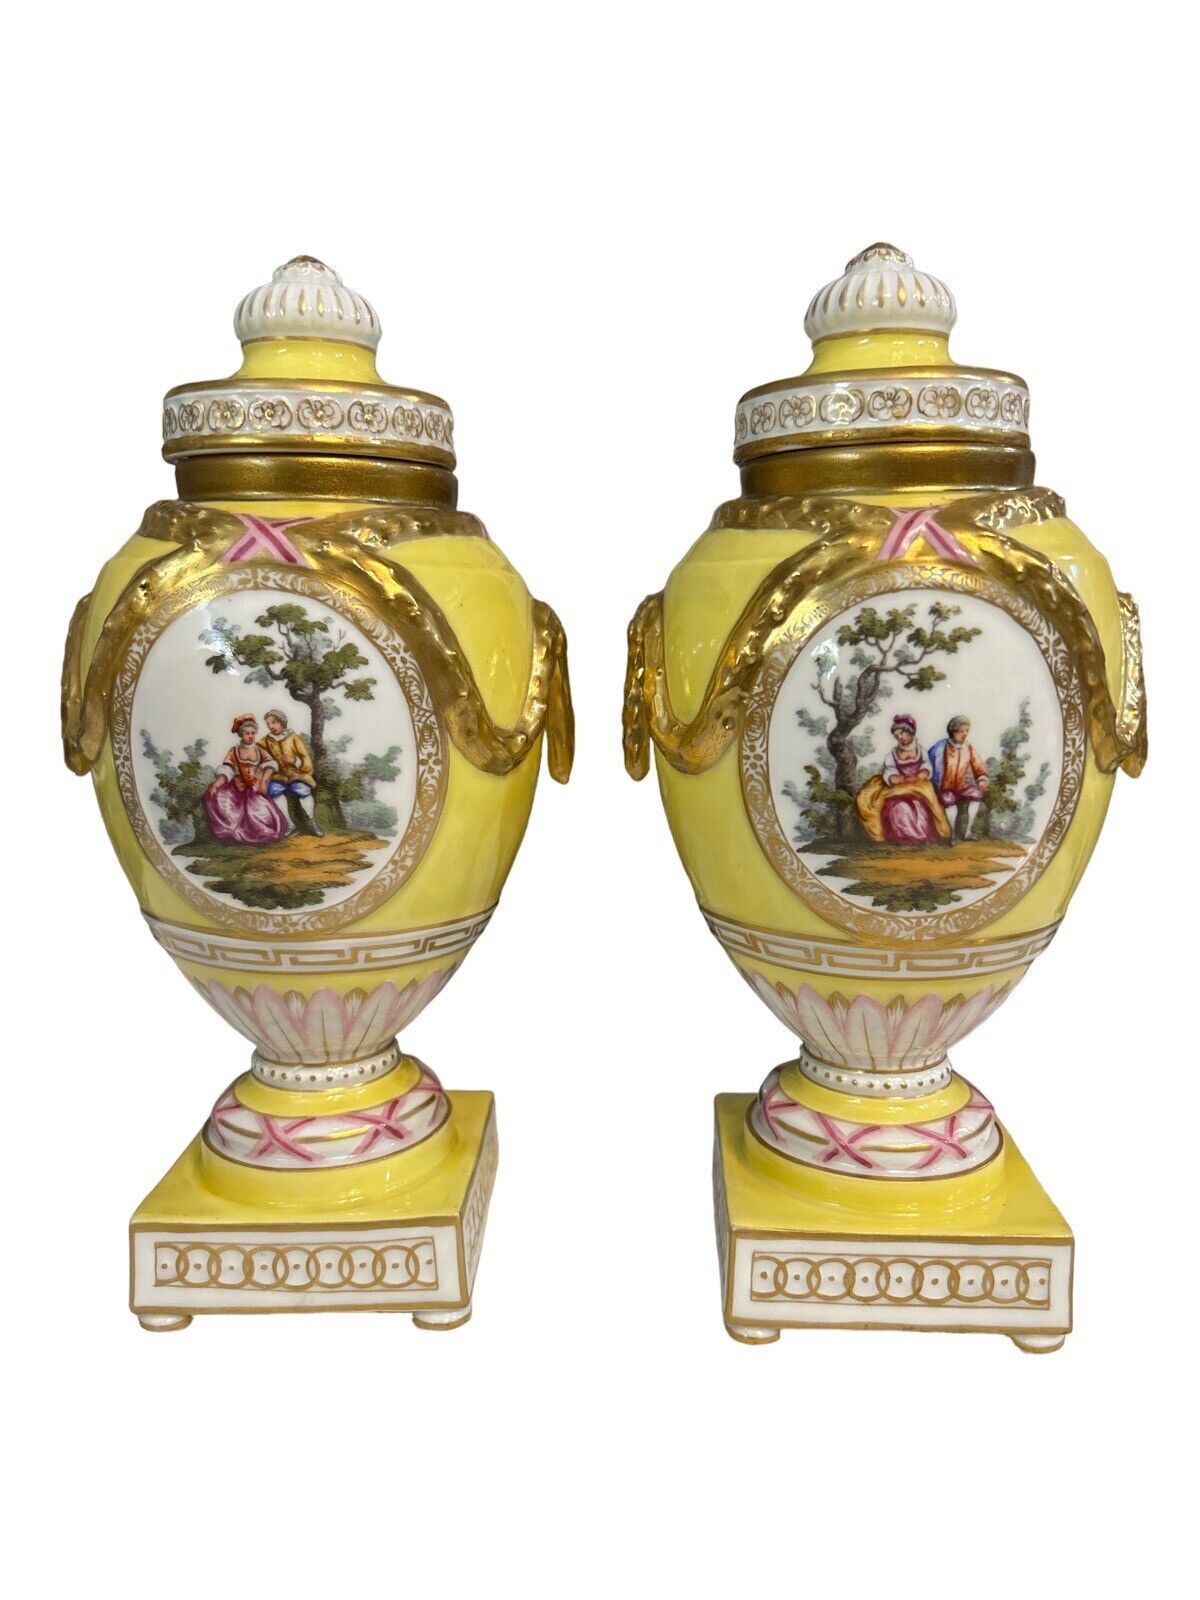 Exquisite Rare Pair of Yellow Early K.P.M Royal Berlin Lidded Vases 1830’s